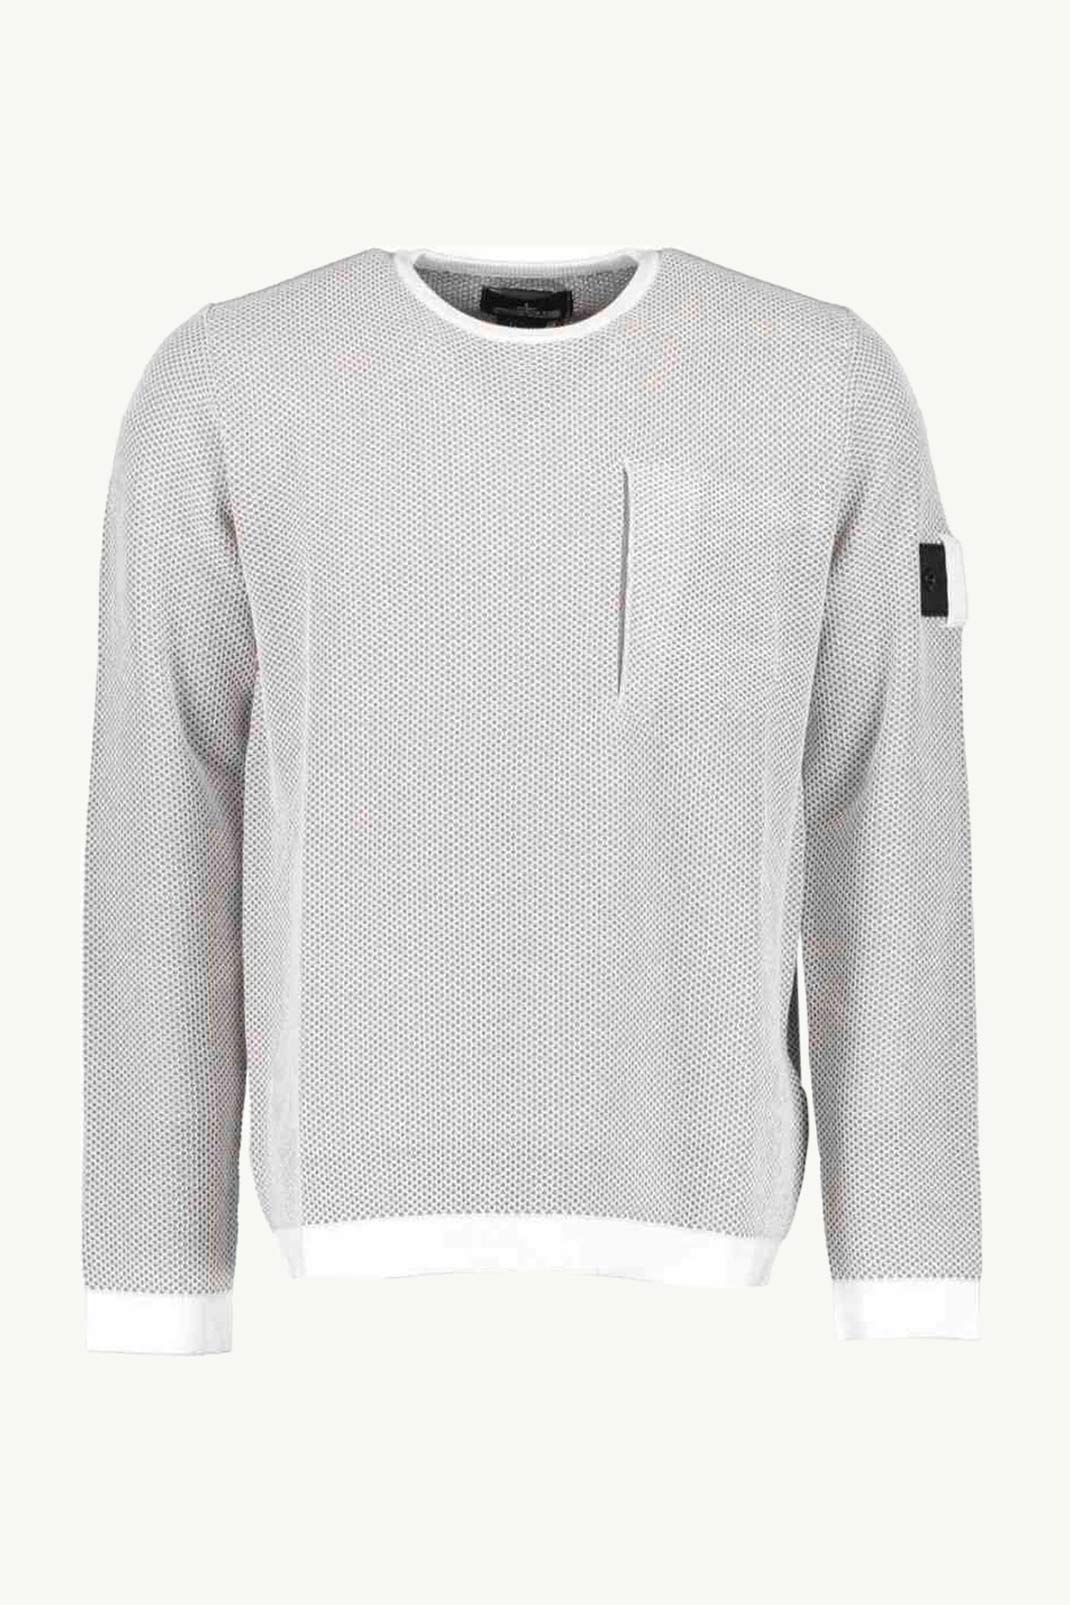 STONE ISLAND Men Shadow Project Mesh-Overlay Logo Jumper in Natural/Grey 0